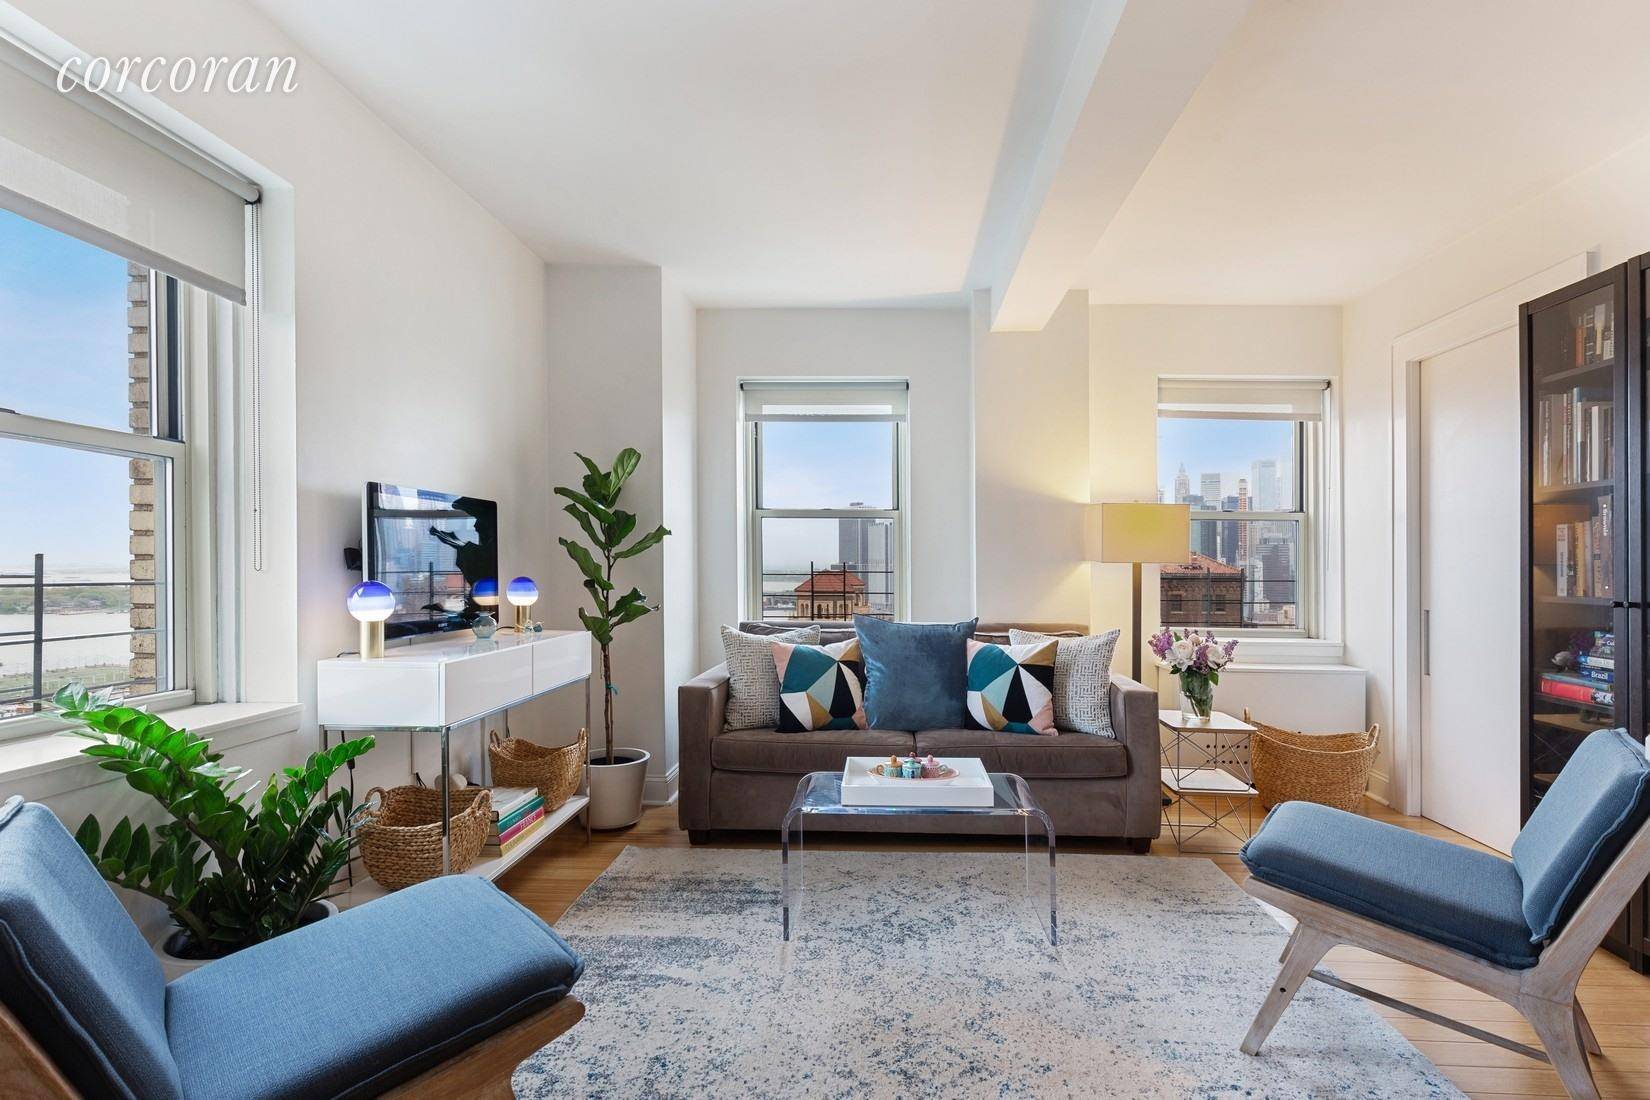 On the 19th floor, above tree lined Brooklyn Heights, with breathtaking views of Manhattan, the New York Harbor, and Brooklyn spanning to the Verrazano Bridge, this beautifully architect renovated, two ...